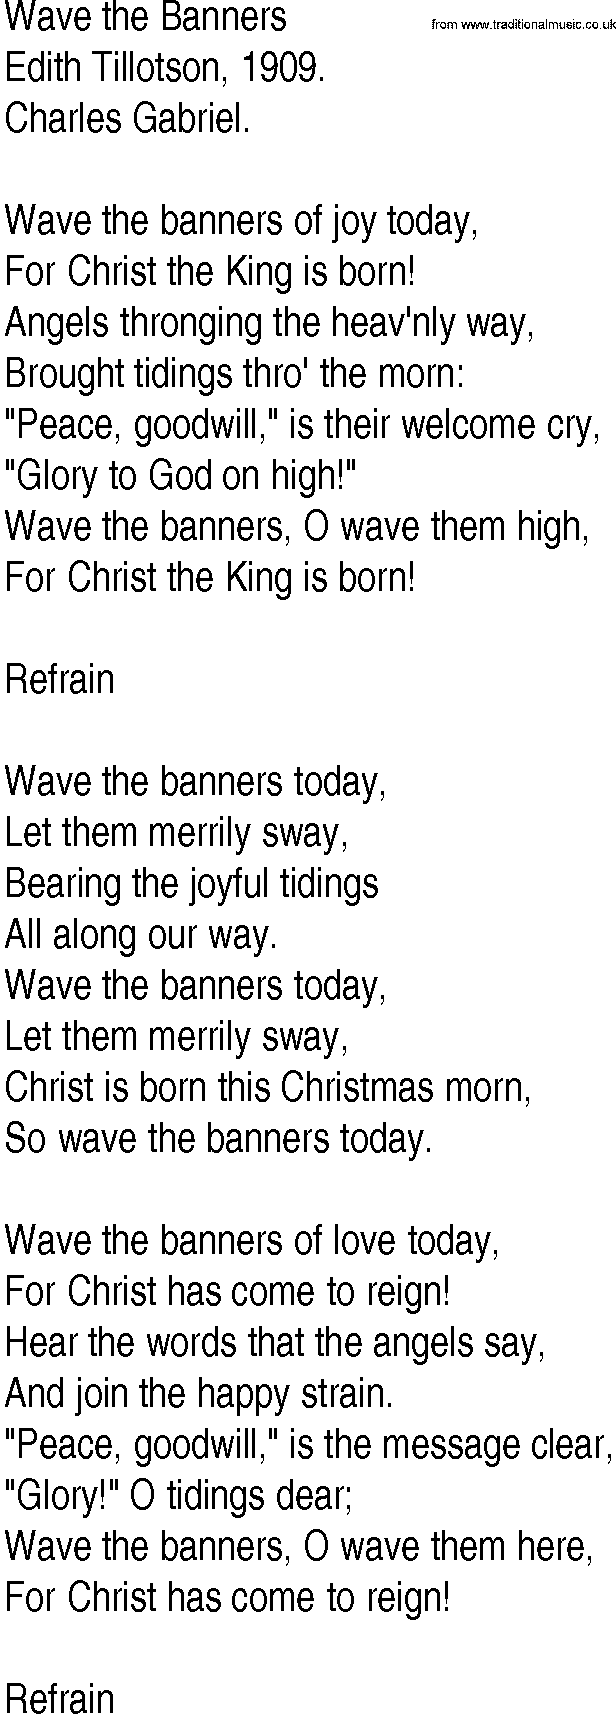 Hymn and Gospel Song: Wave the Banners by Edith Tillotson lyrics